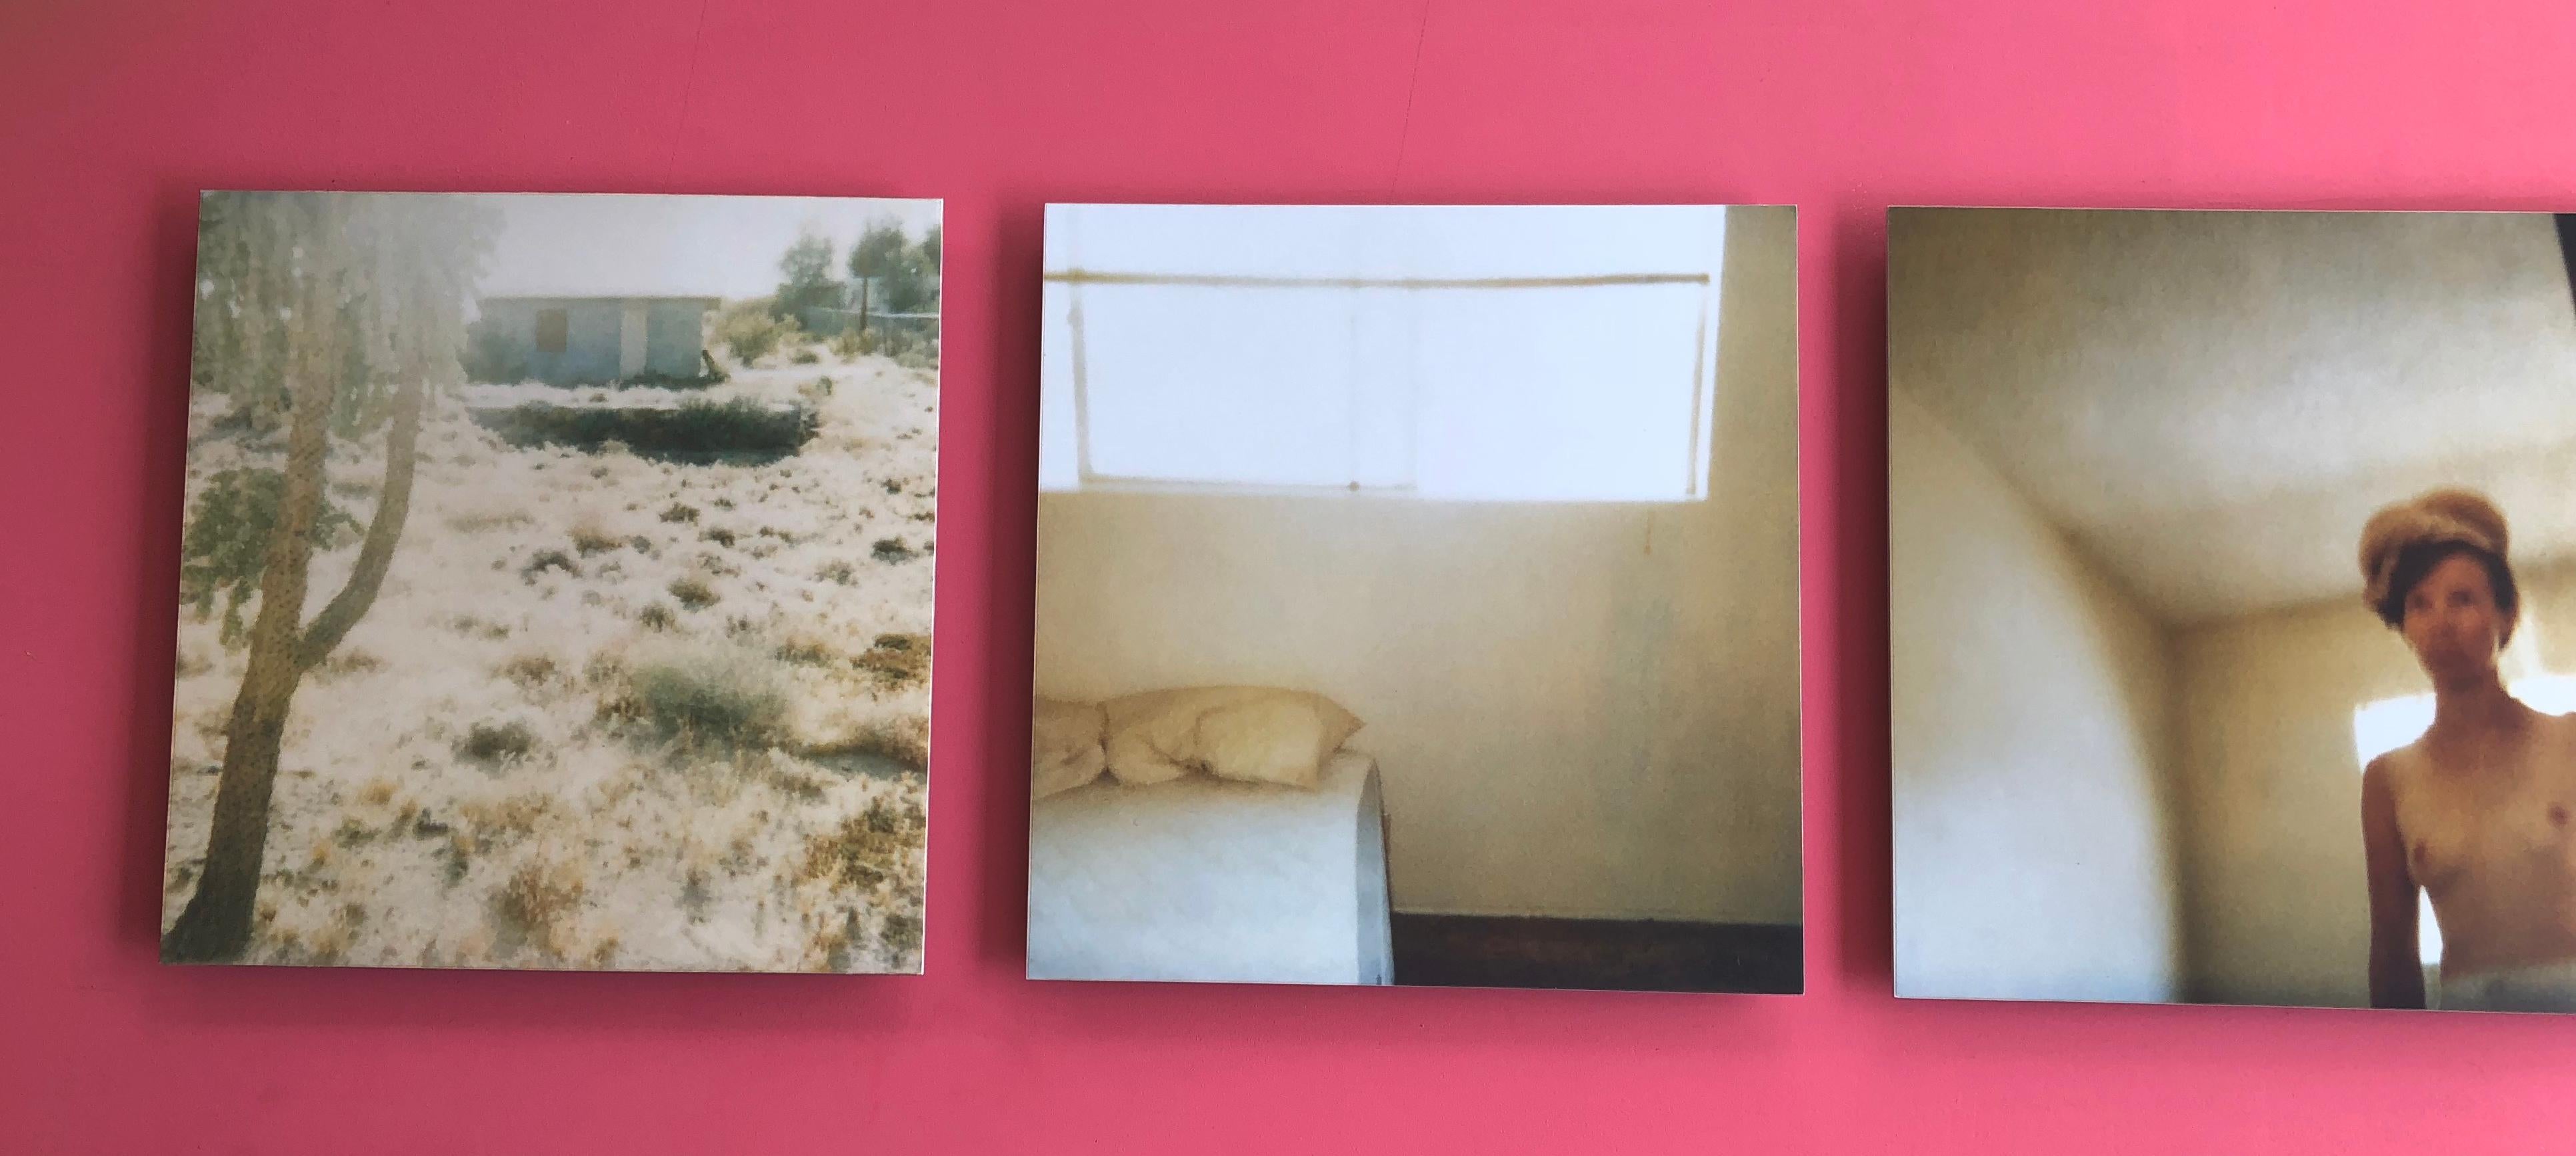 Blue House' (29 Palms, CA) - 1998, triptych  

Edition 4/25,
38x37cm each, together installed 38 x 125cm with gaps. 
Analog C-Prints, hand-printed by the artist, based on the 3 original Polaroids, 
mounted on Aluminum with matte UV-Protection.